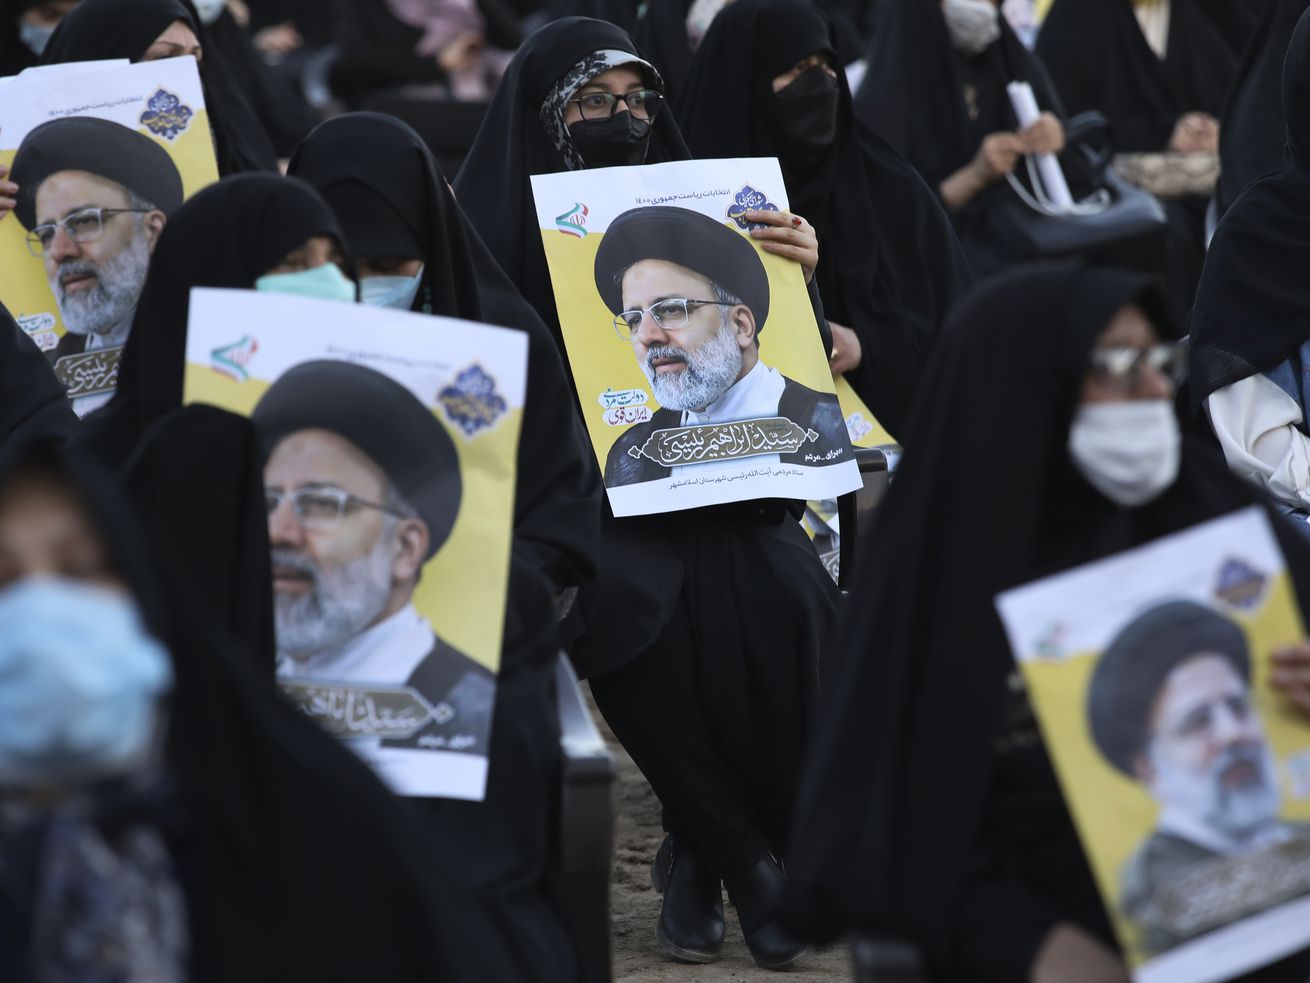 Supporters of the presidential candidate Ebrahim Raisi, currently judiciary chief, hold his posters during a campaign rally in town of Eslamshahr southwest of the capital Tehran, Iran, Sunday, June 6, 2021. Iran will hold presidential elections on June 18 with 7 candidates approved by the Guardian Council. 